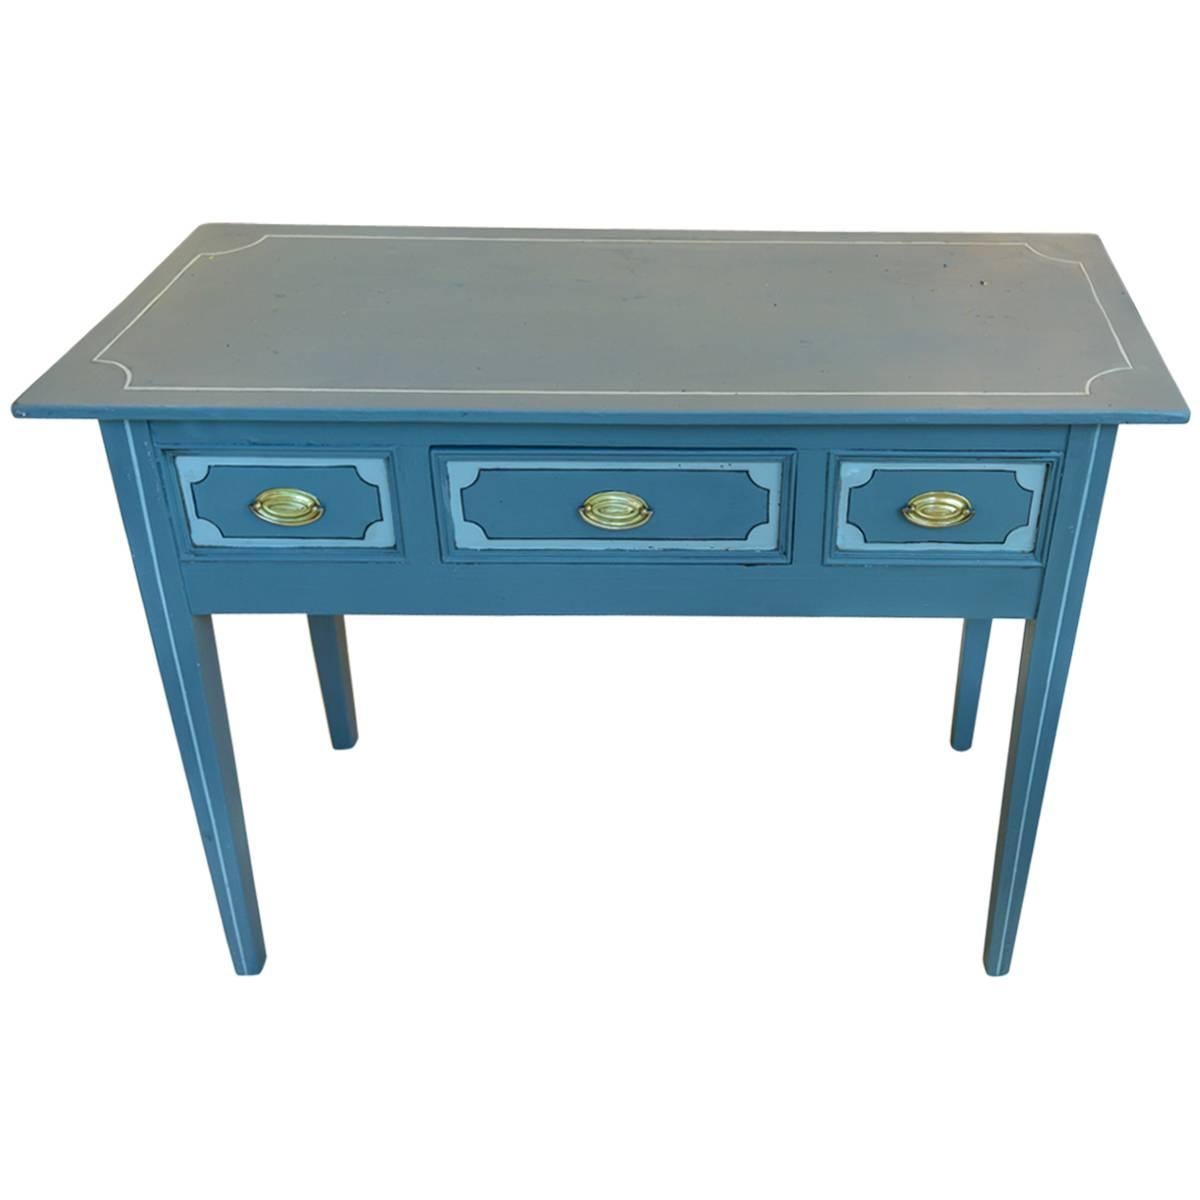 19th Century English Regency Painted Serving Table